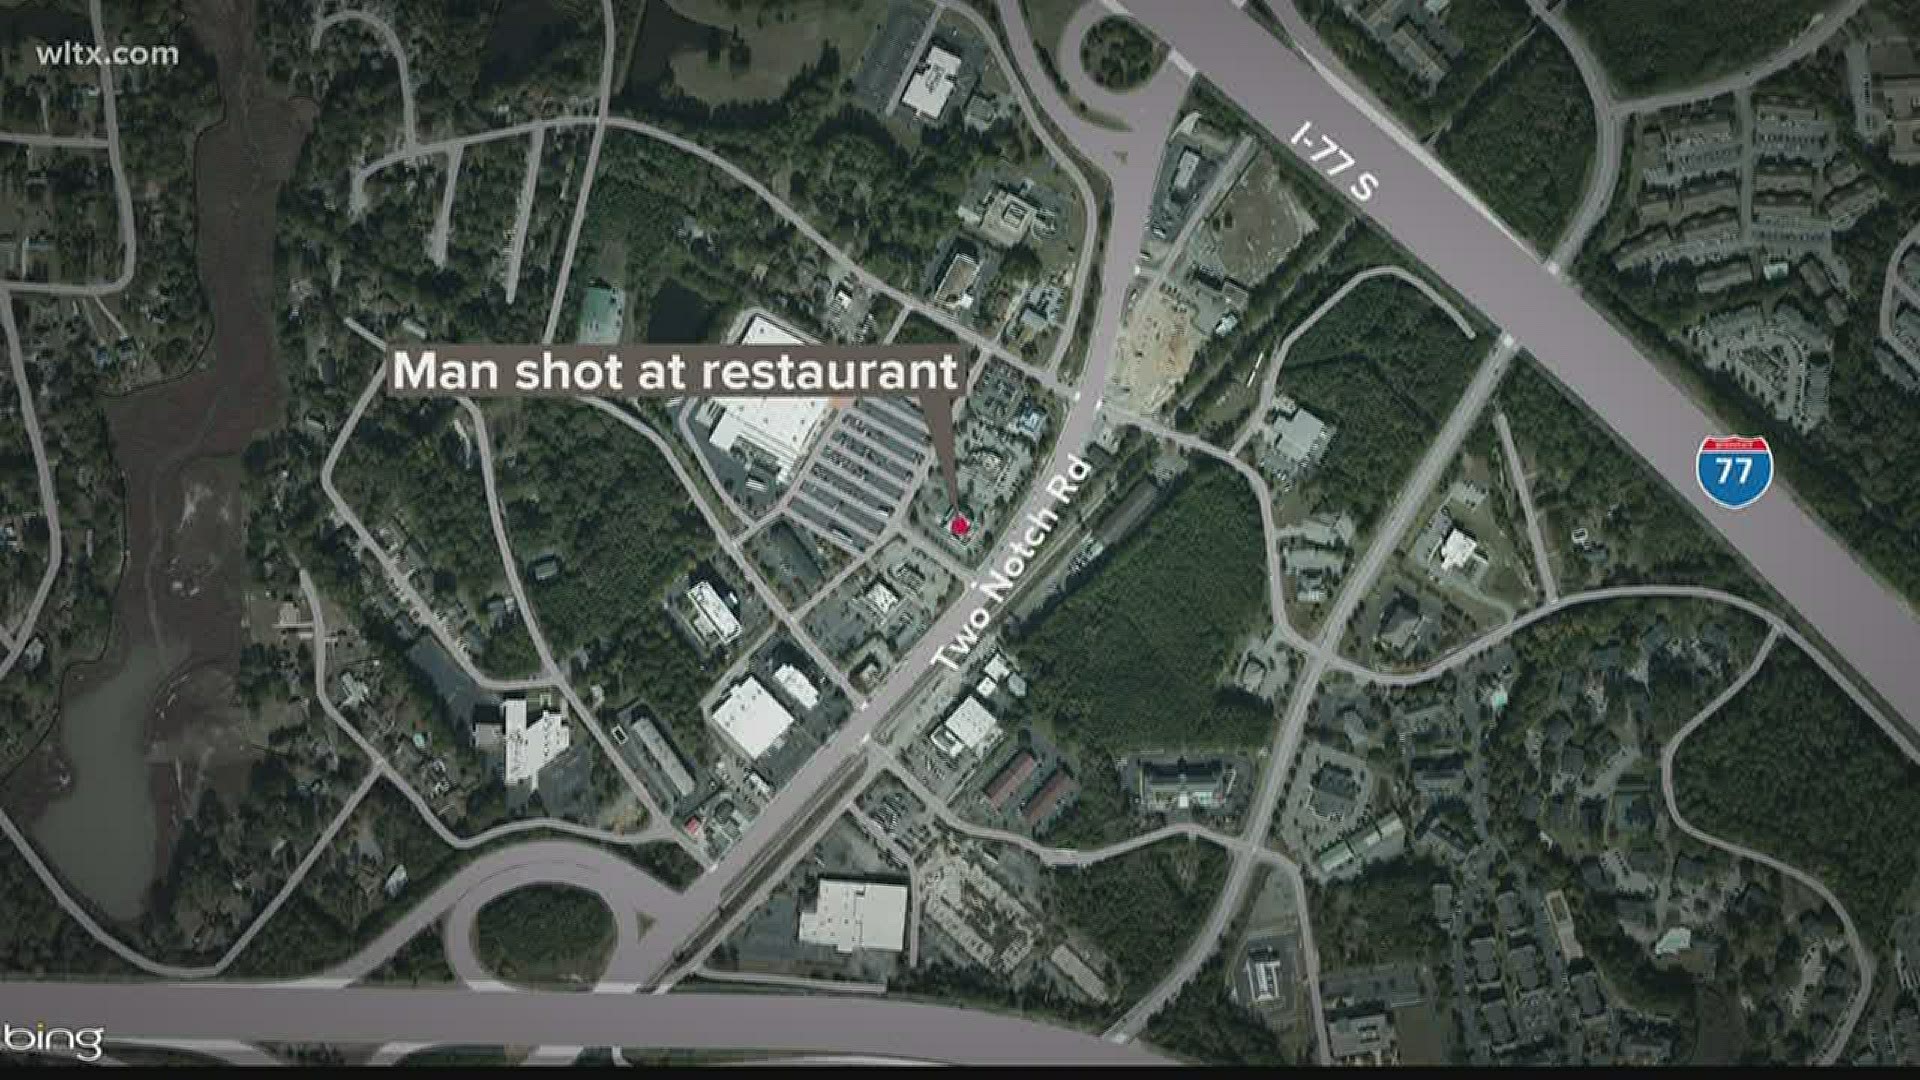 A man was shot in the upper body around noon at the restaurant.